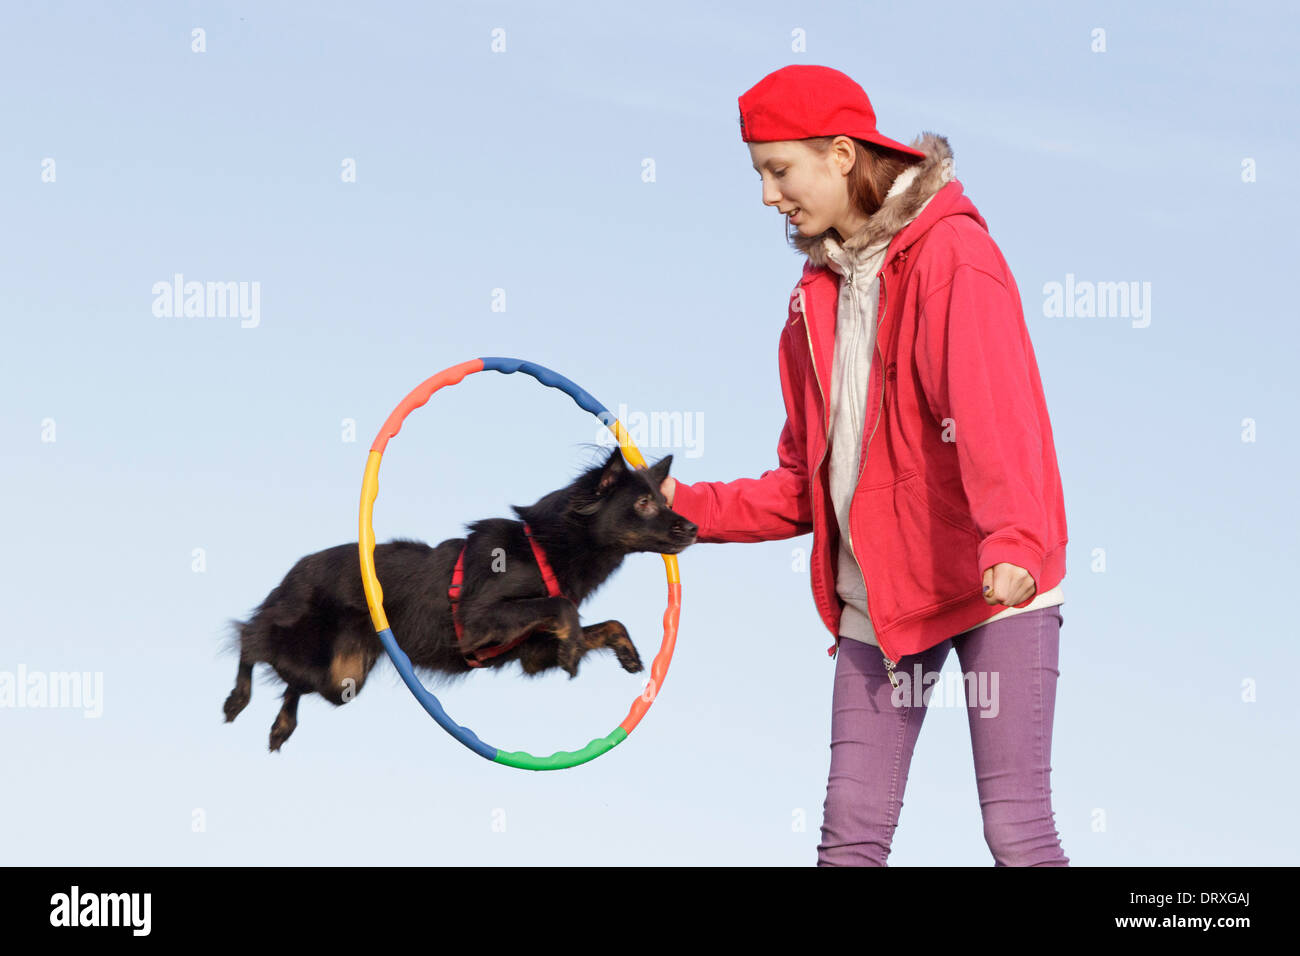 young girl making her dog jump through a hoop Stock Photo